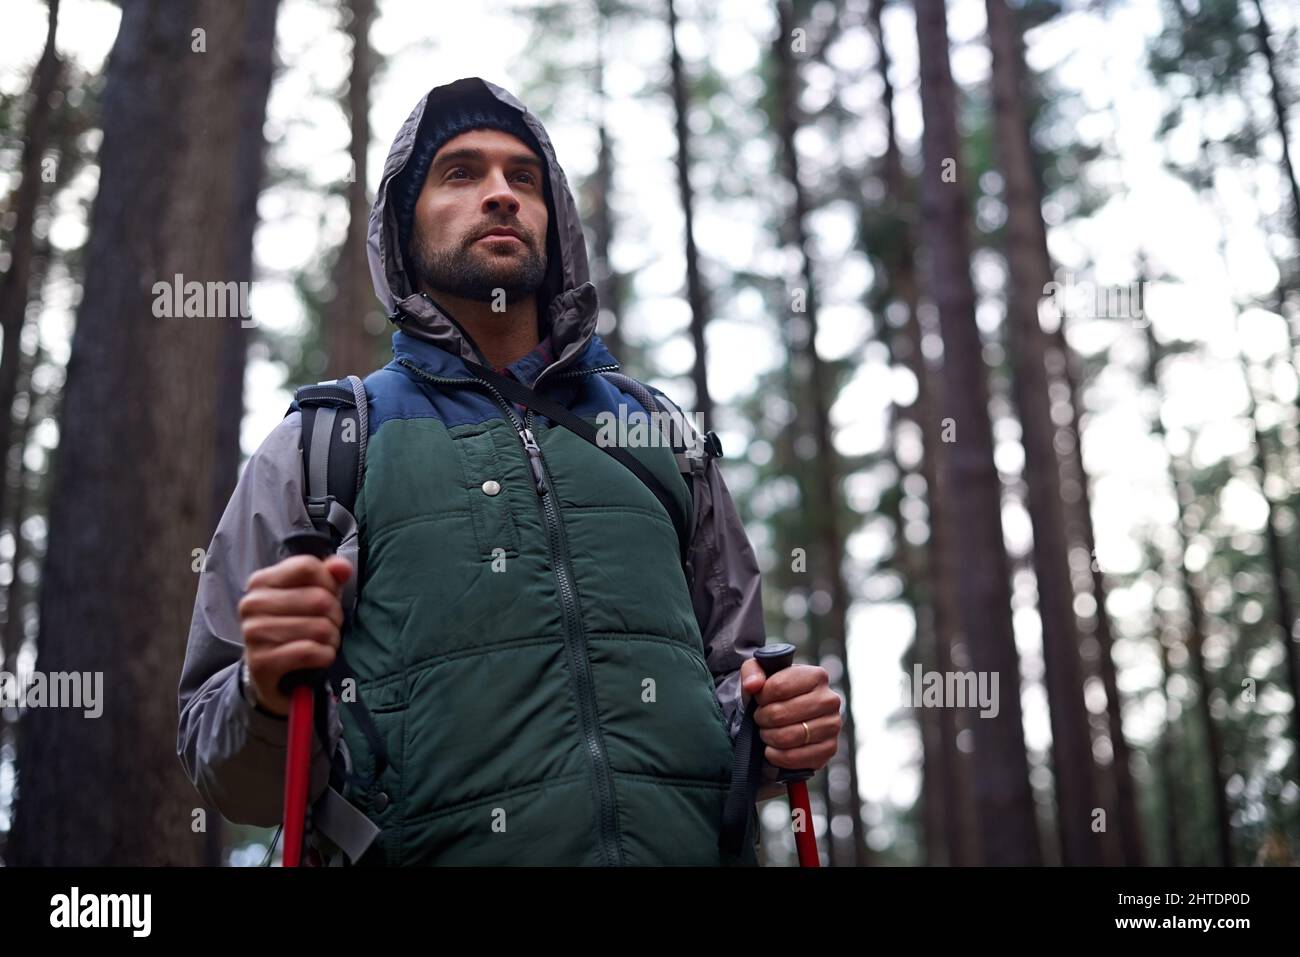 Surveying the wilderness. Shot of a handsome man hiking in a pine forest using nordic walking poles. Stock Photo